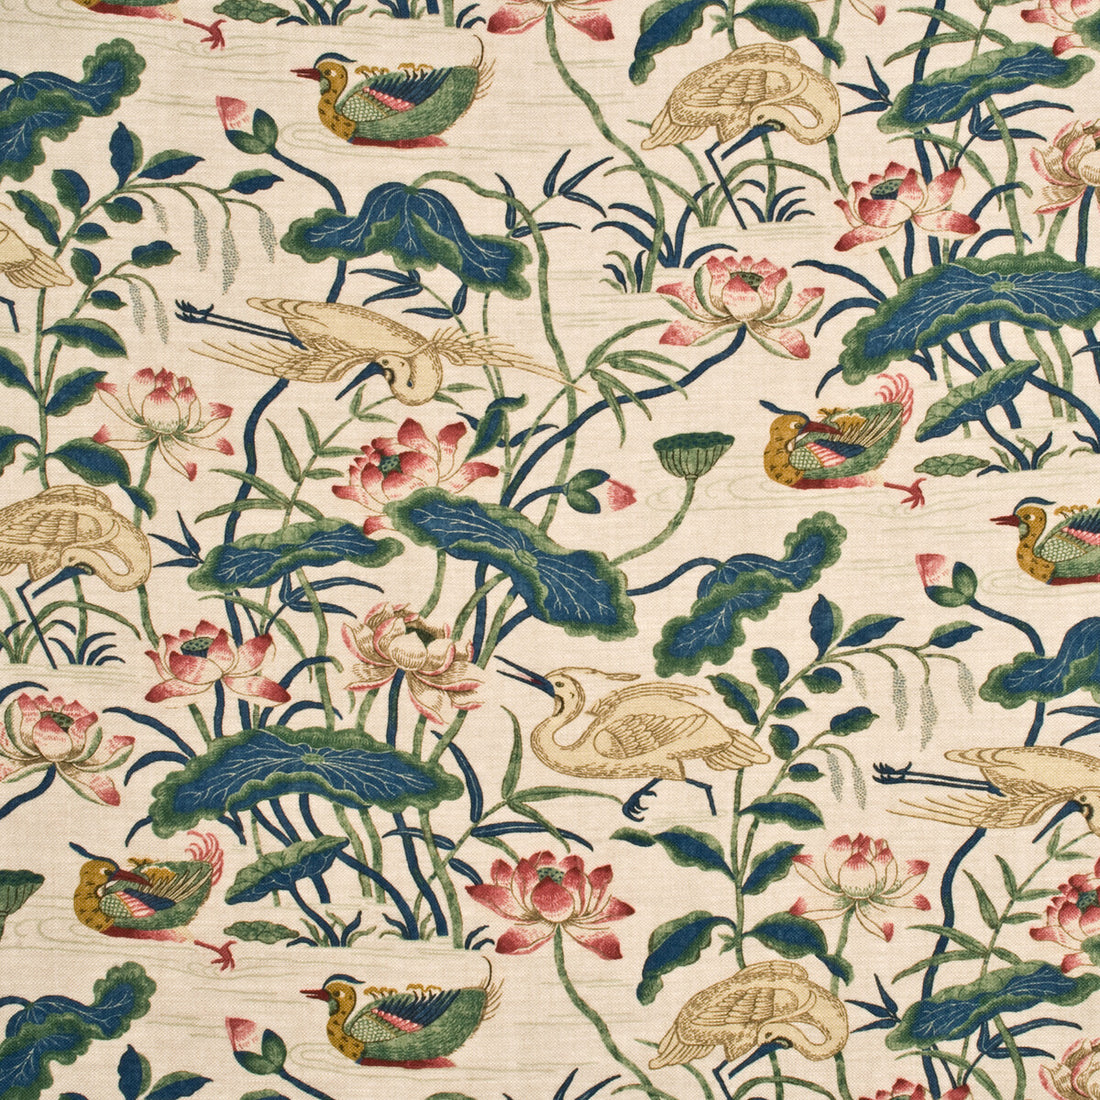 Heron &amp; Lotus Flower fabric in indigo/pink color - pattern BP10307.2.0 - by G P &amp; J Baker in the Emperor&